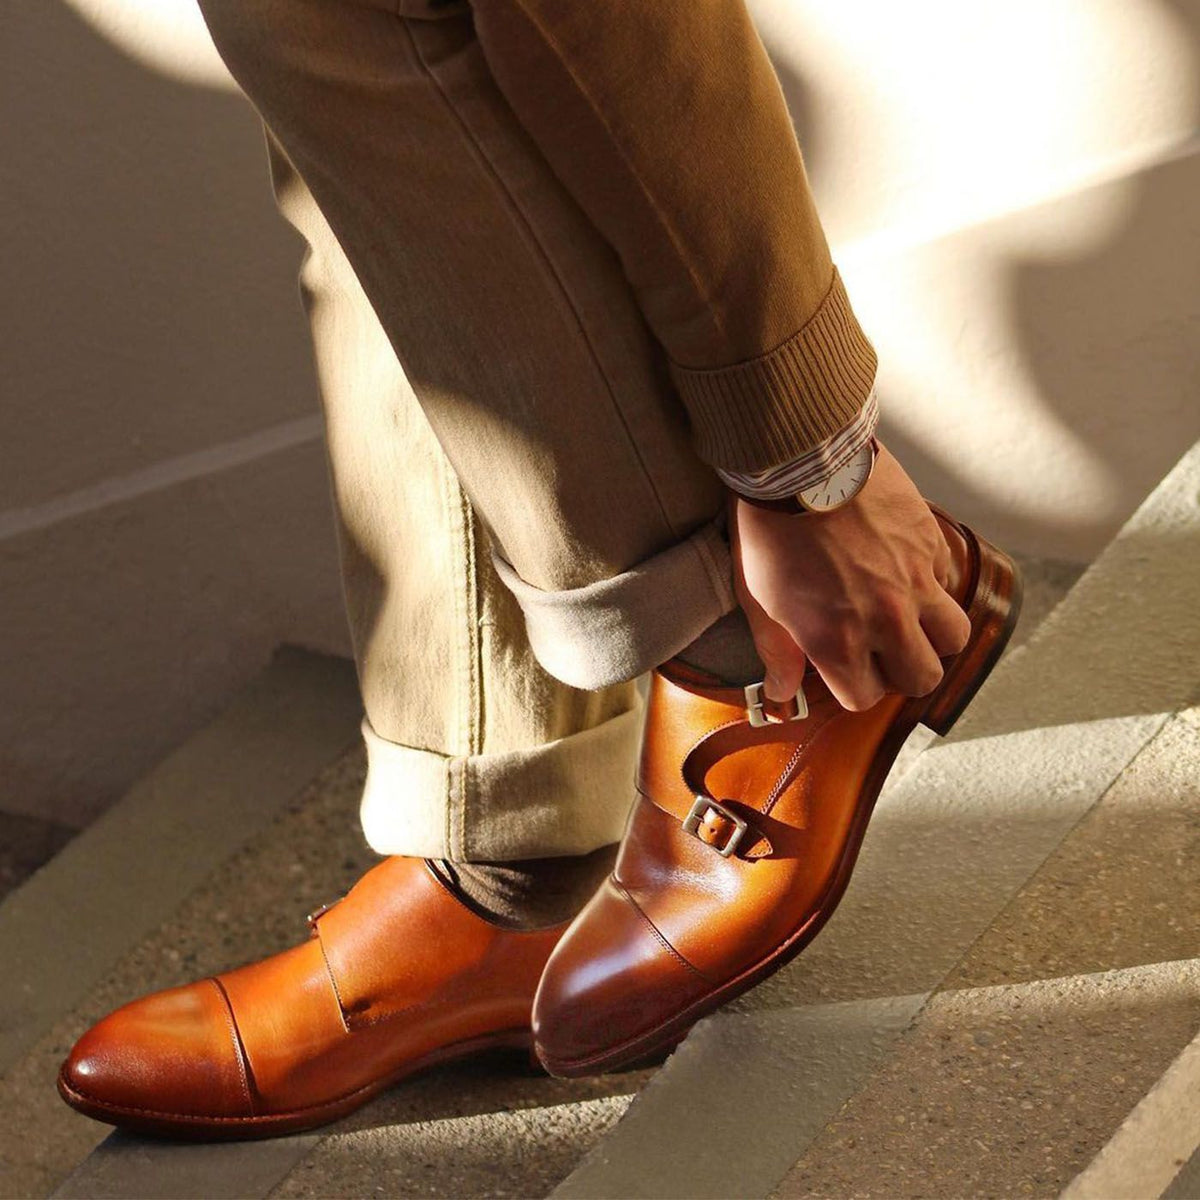 Common Problems With Men's Shoes 